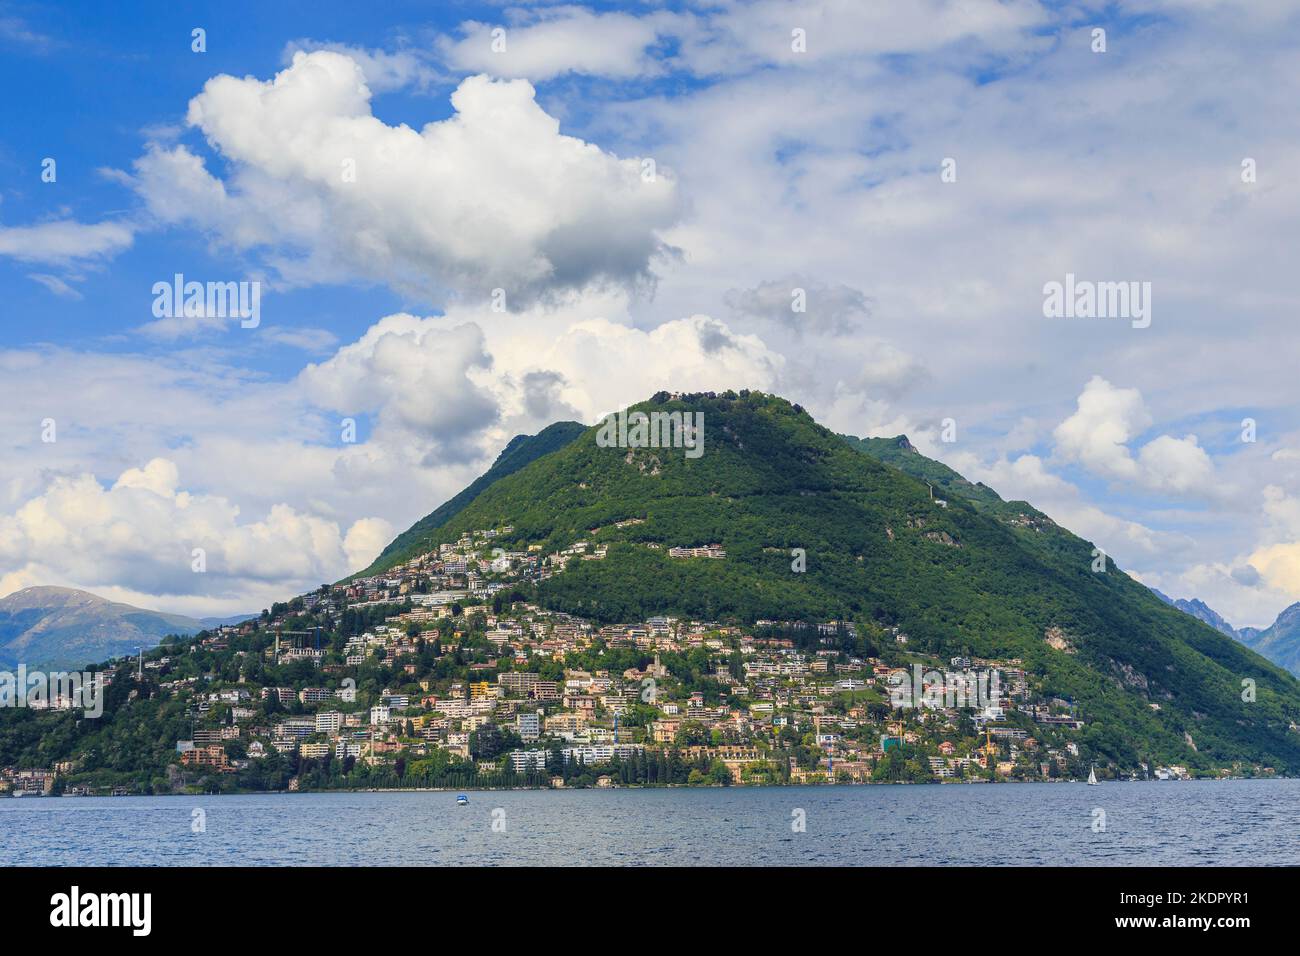 LUGANO, SWITZERLAND - MAY 12, 2018: It is a view of the Monte Bre mountain from Lake Lugano. Stock Photo